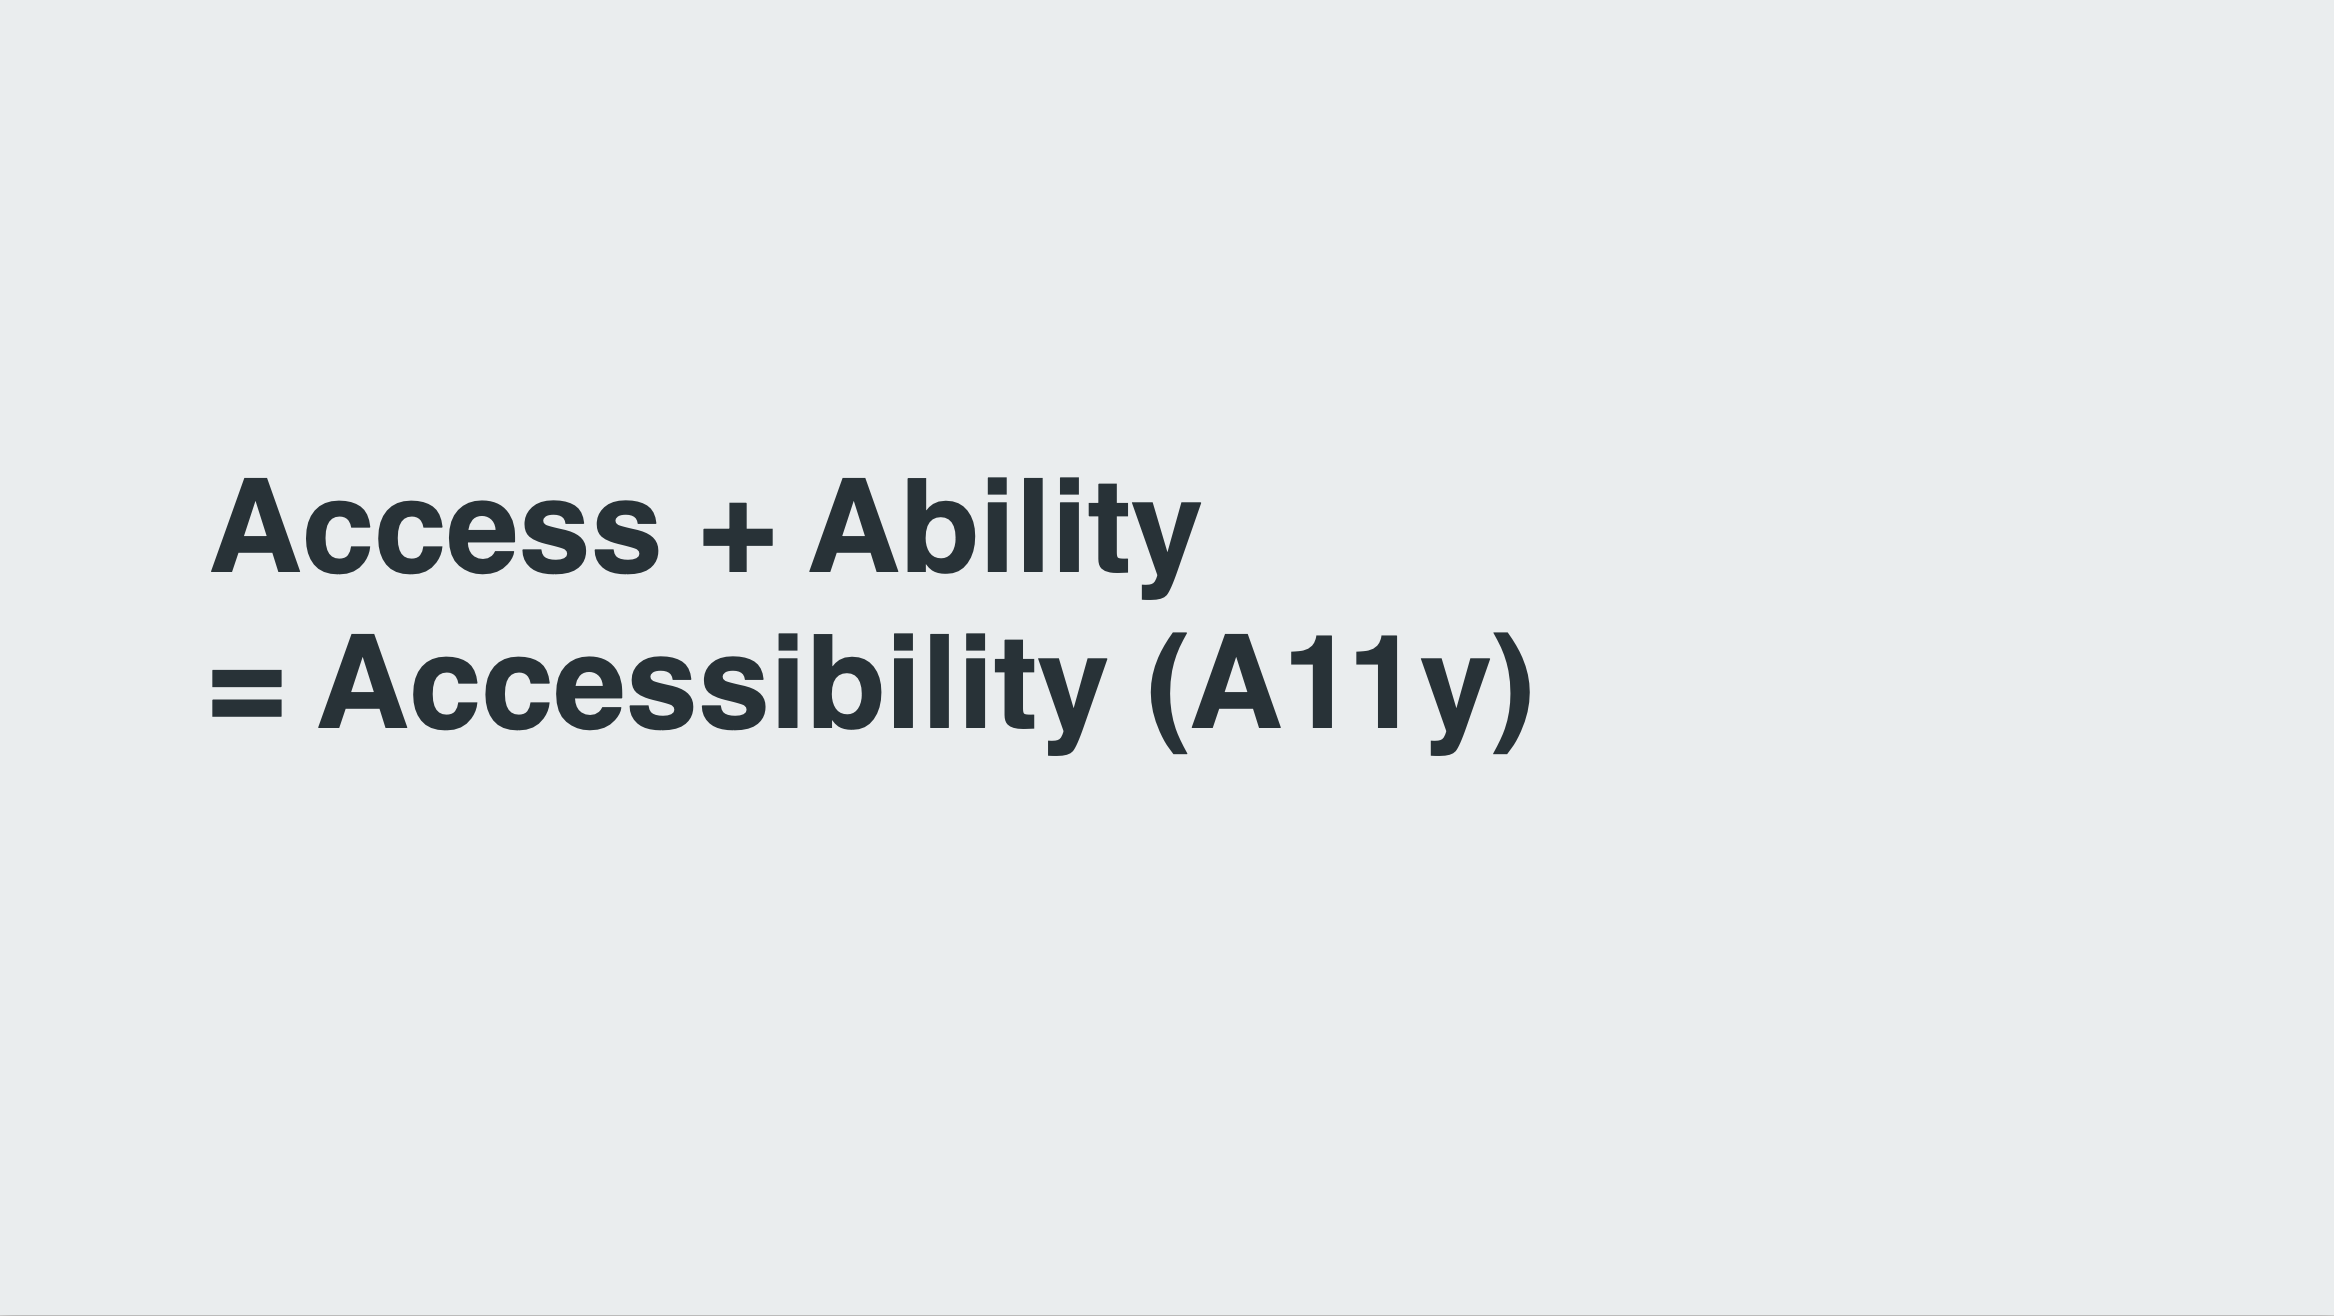 Access + Ability = Accessibility (A11y)